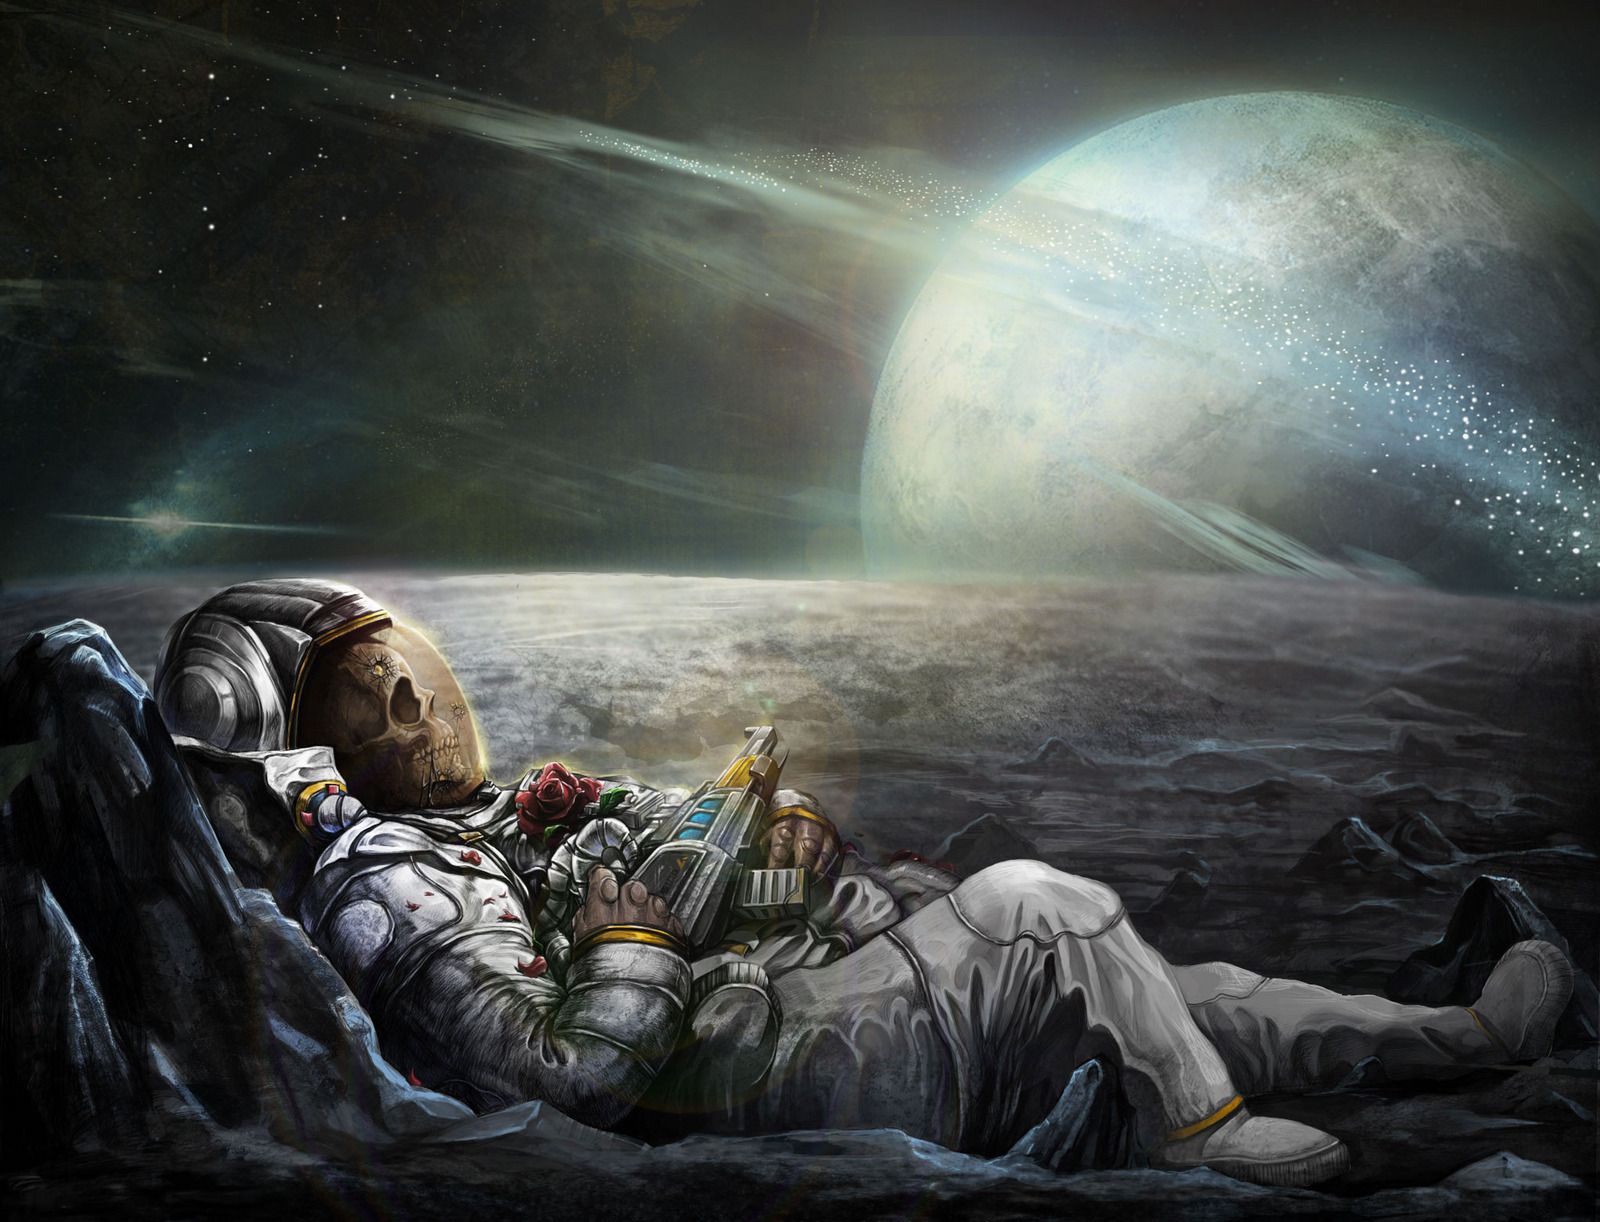 Funny Astronaut Wallpapers